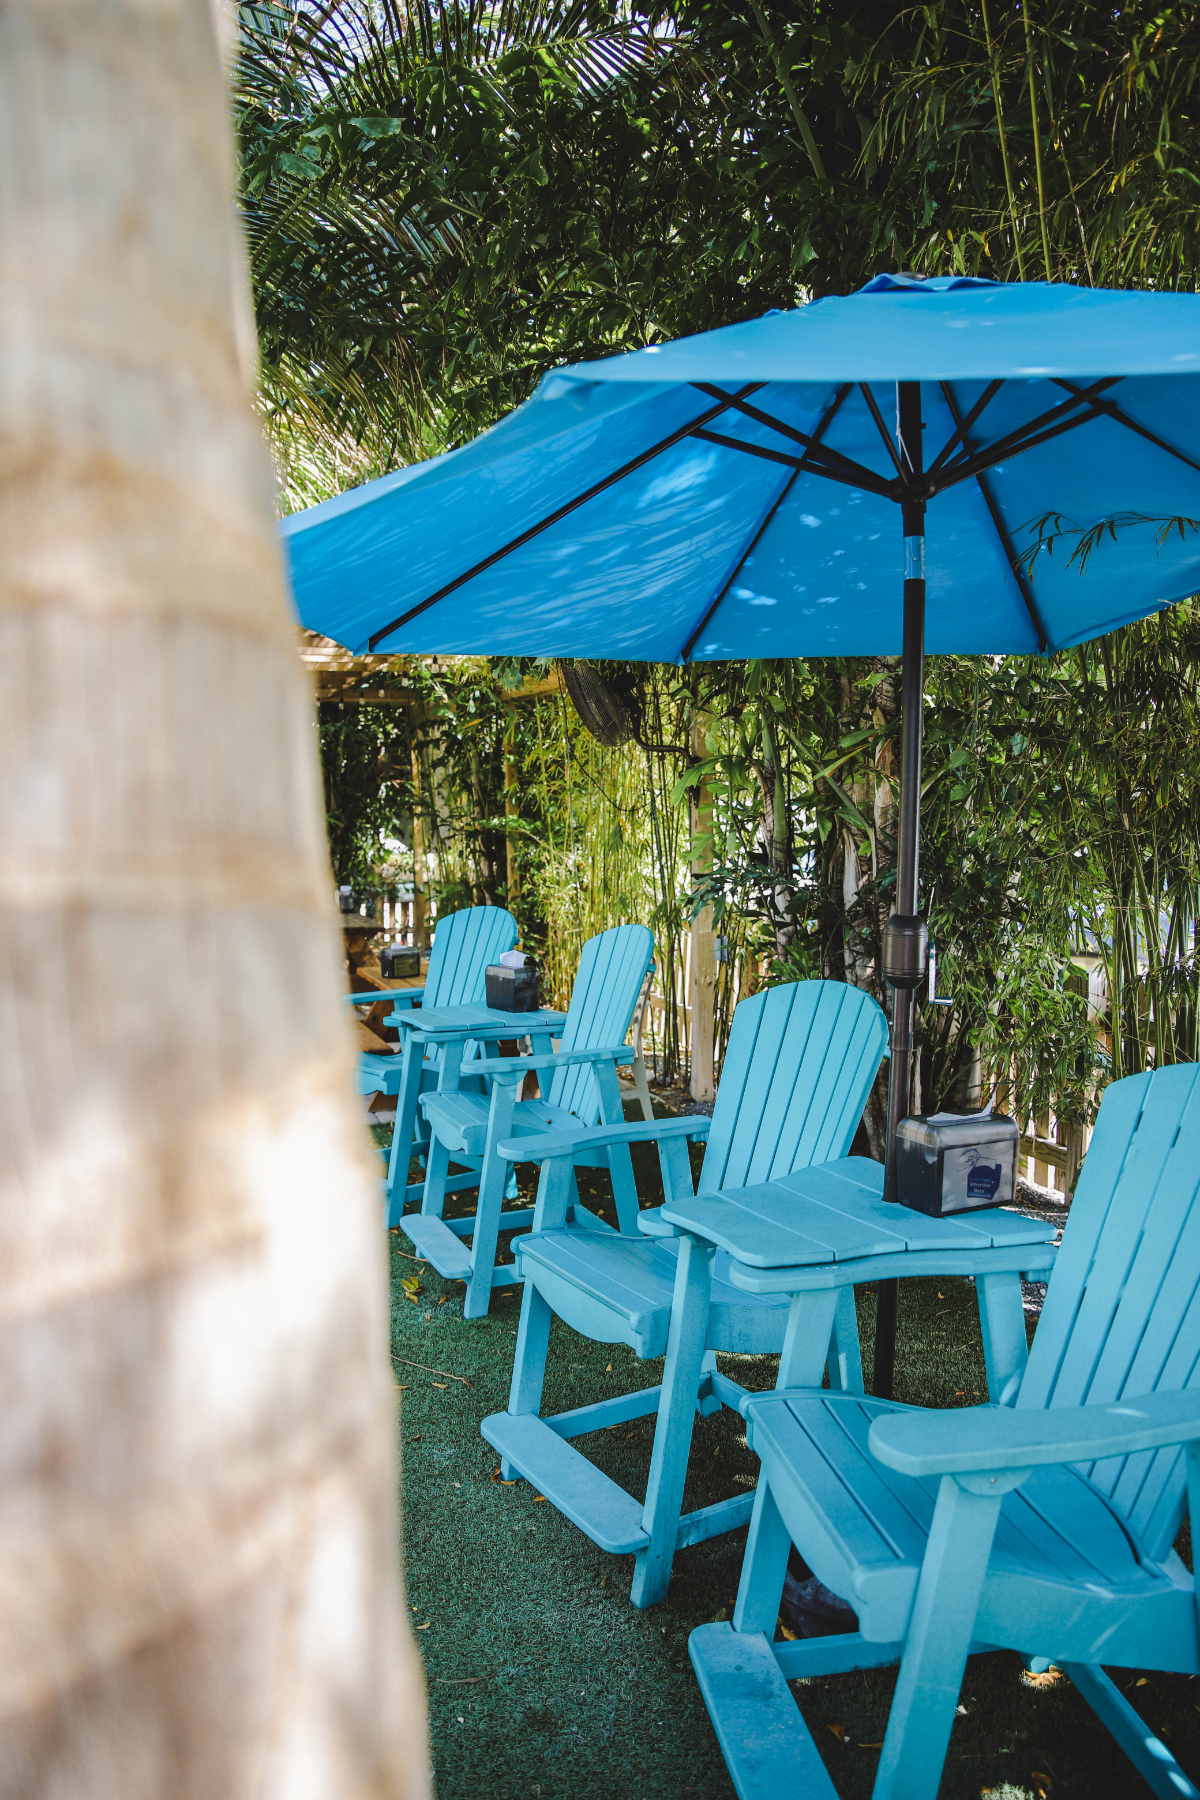 A Line of beach chairs sit under an umbrella in a grassy area at Islamorada Brewery and Distillery